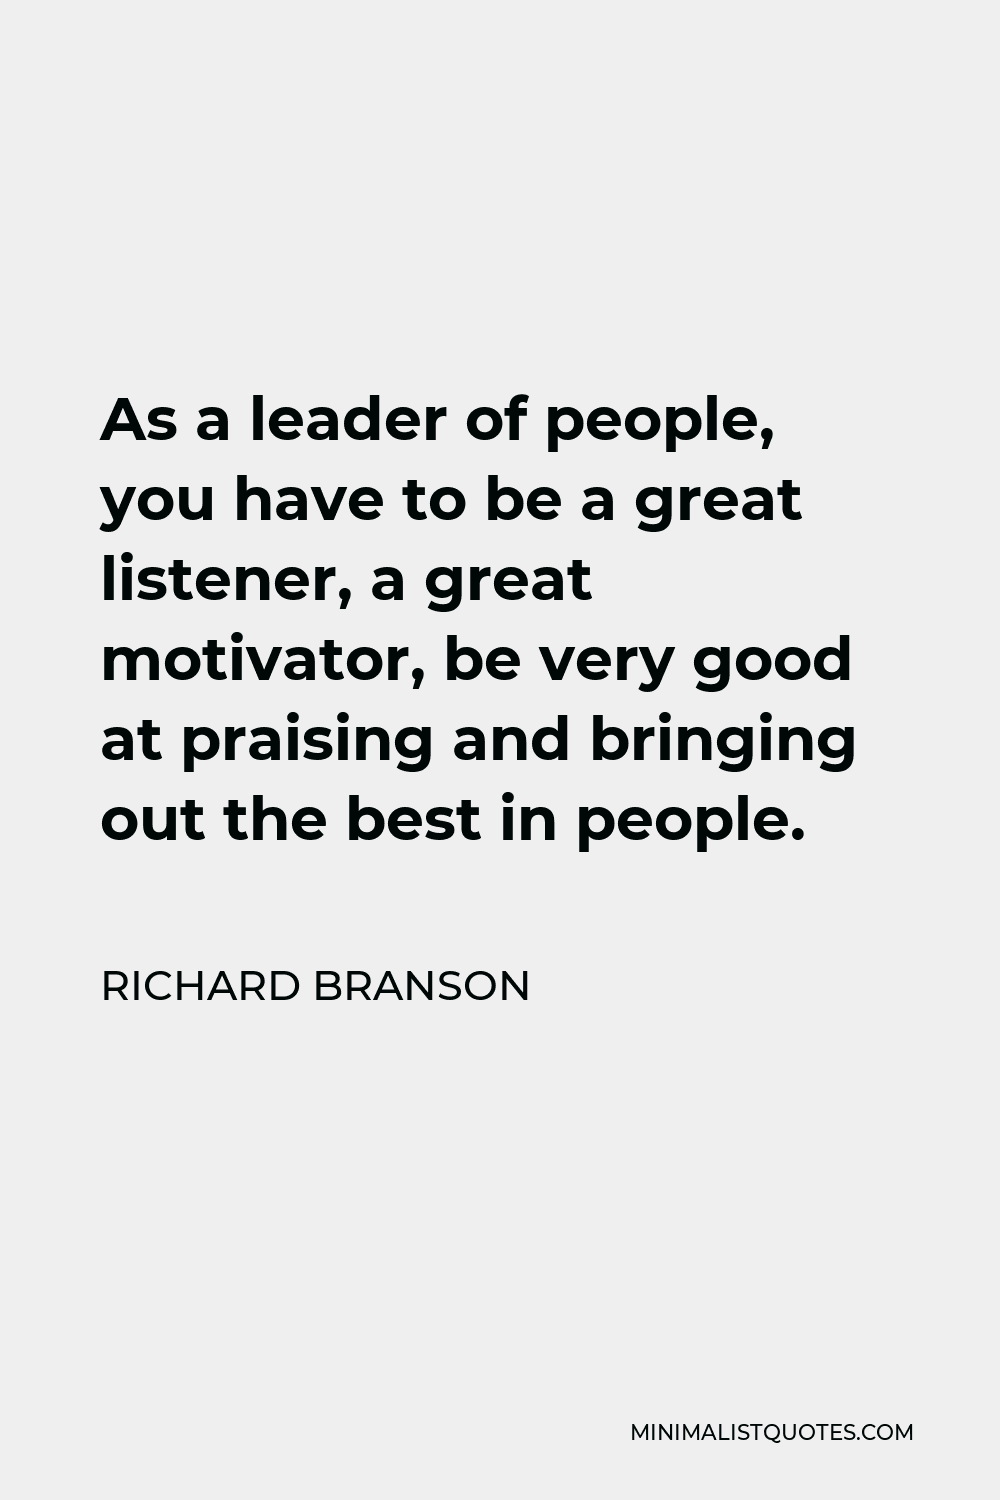 Richard Branson Quote - As a leader of people, you have to be a great listener, a great motivator, be very good at praising and bringing out the best in people.